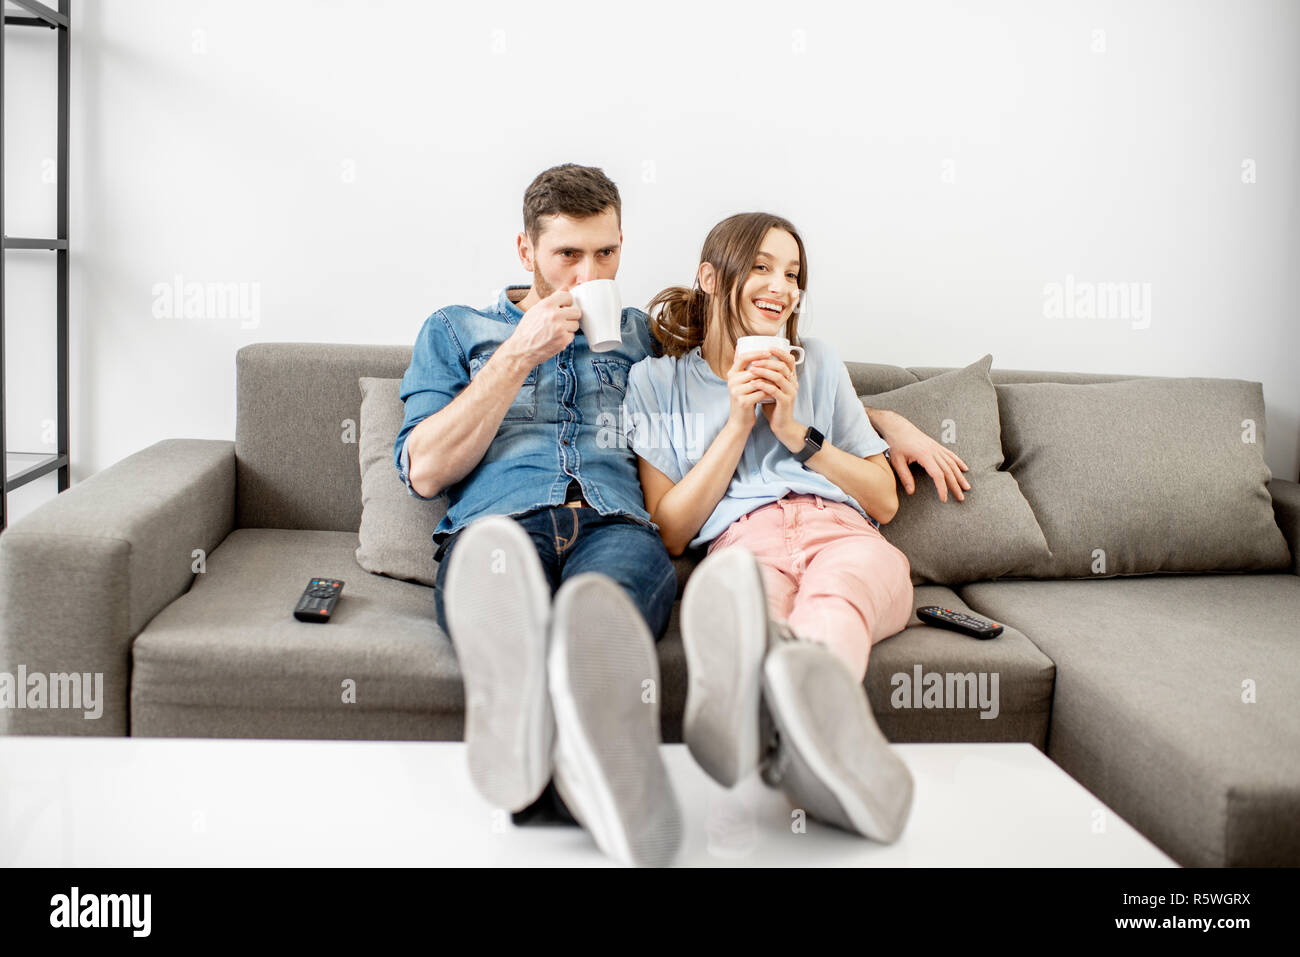 Young couple dressed casually sitting together on the couch and watching TV at home Stock Photo